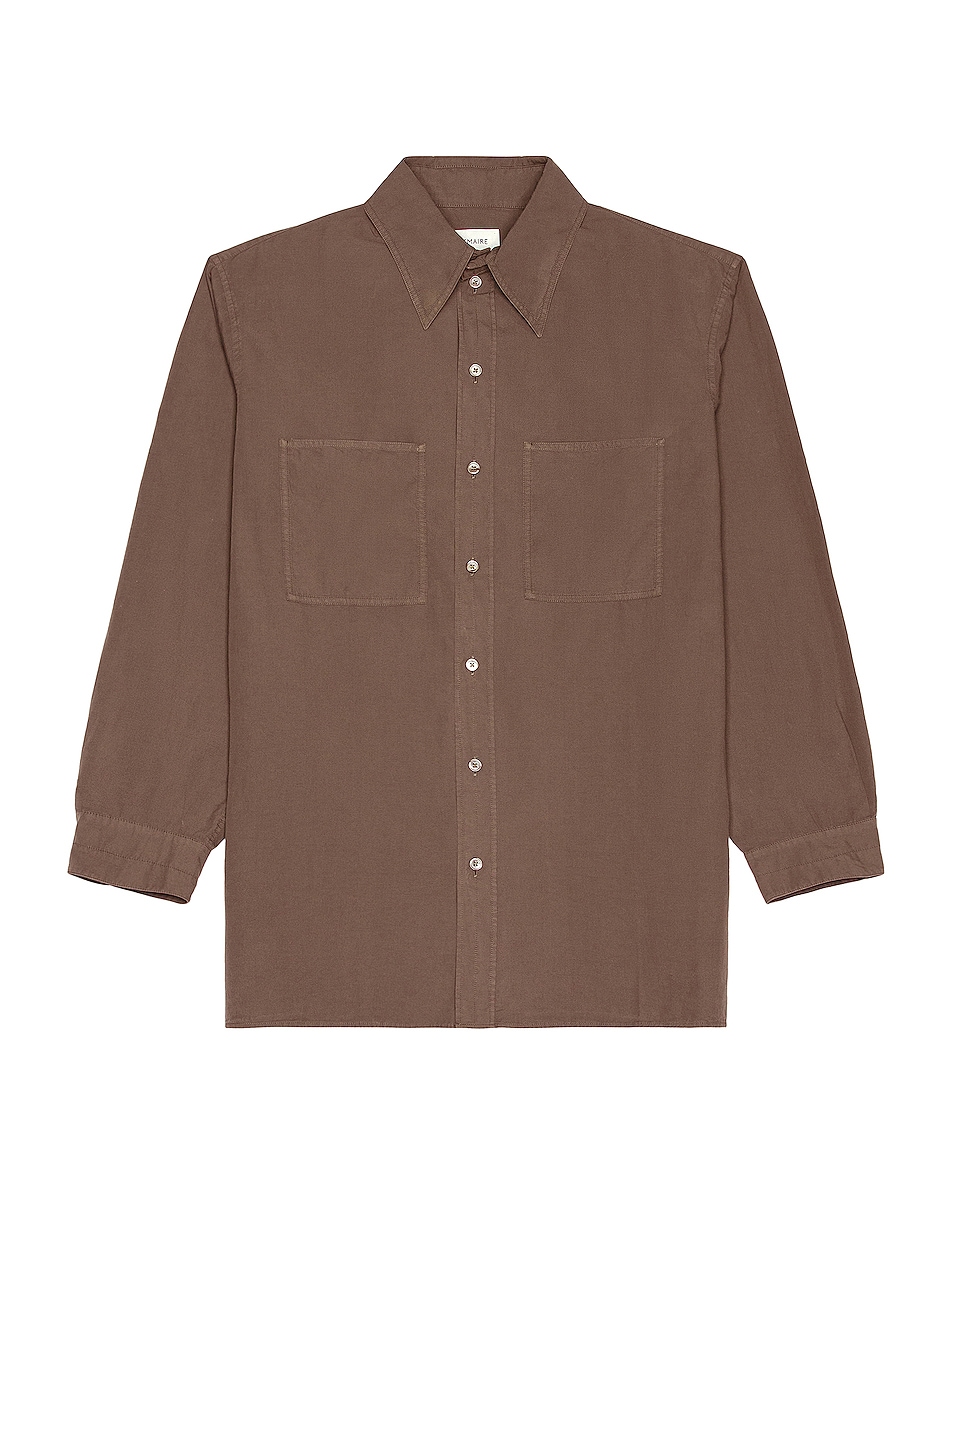 Image 1 of Lemaire Patch Pocket Shirt in Chestnut